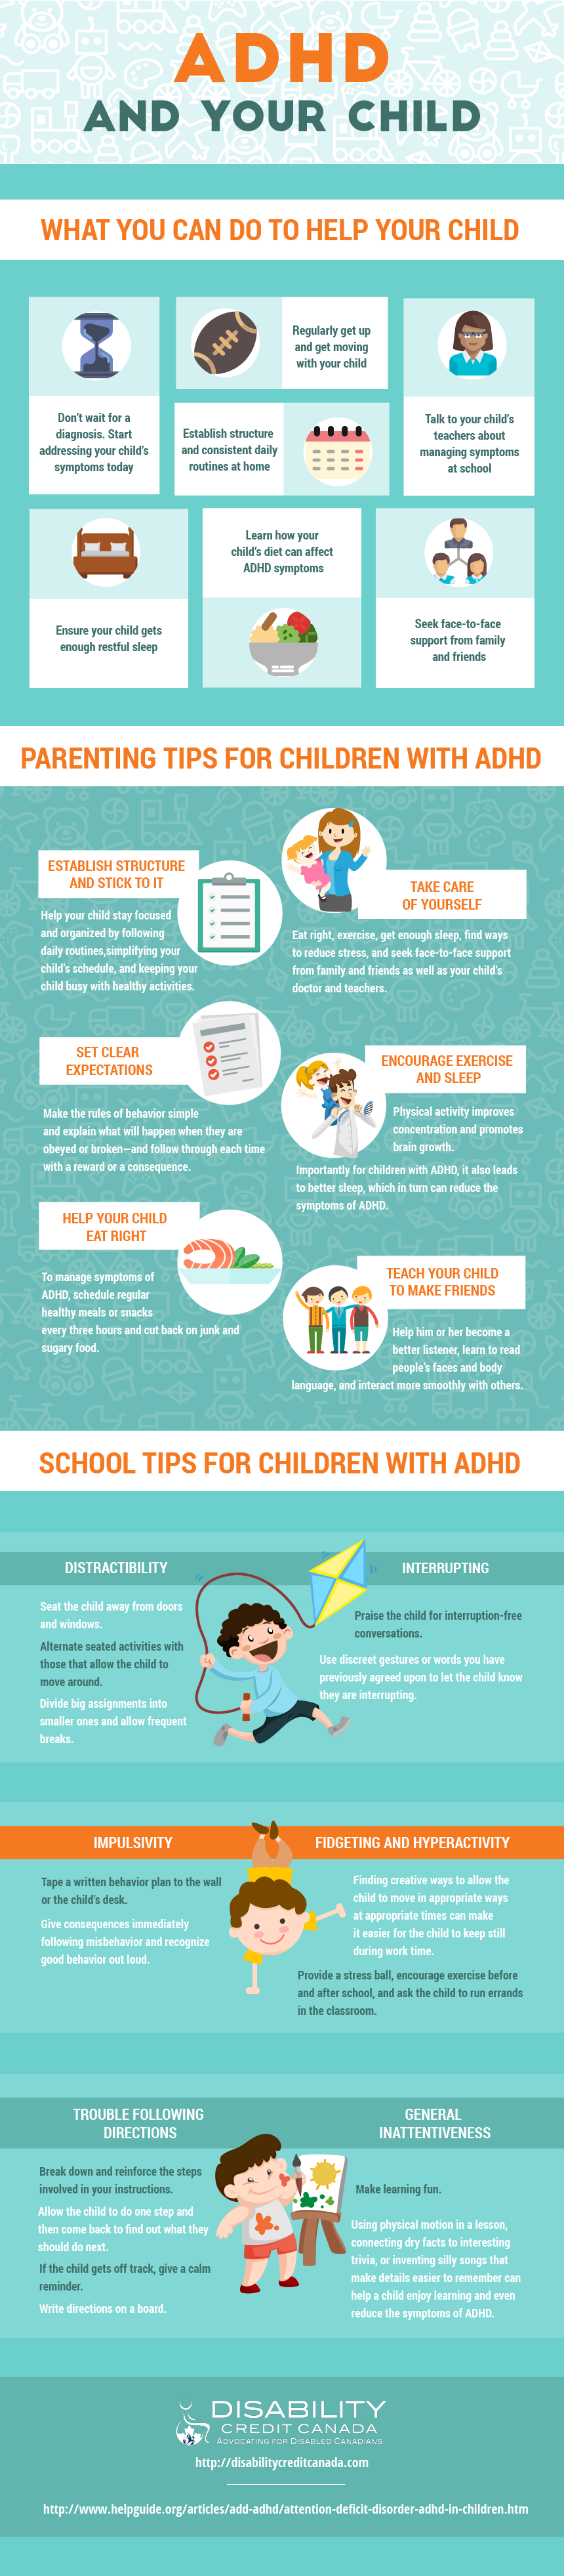 Parenting Tips for Children With ADHD Infographic | ADHD/ADD